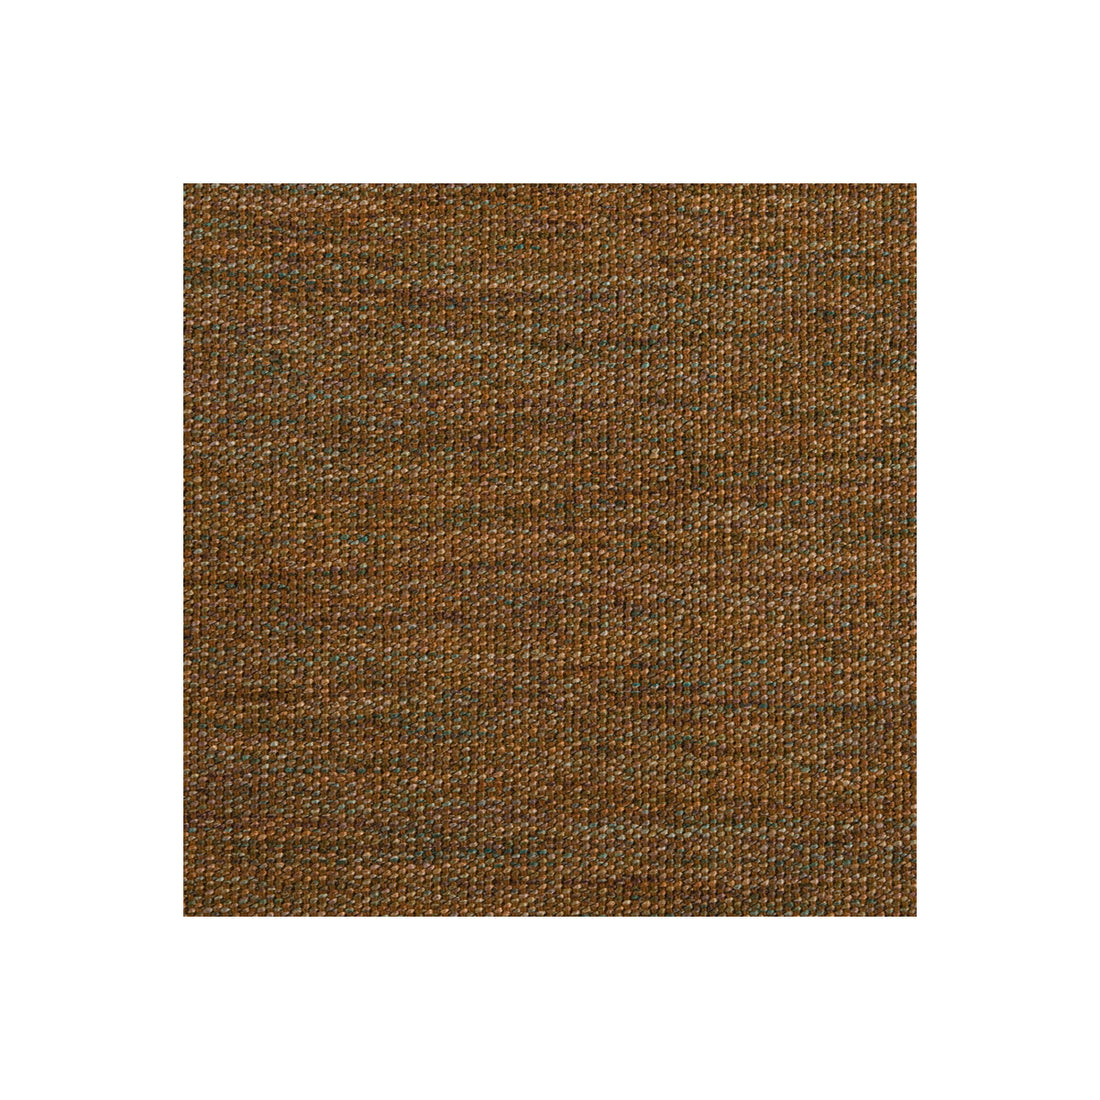 Mineral Weave fabric in truffle color - pattern 26950.635.0 - by Kravet Smart